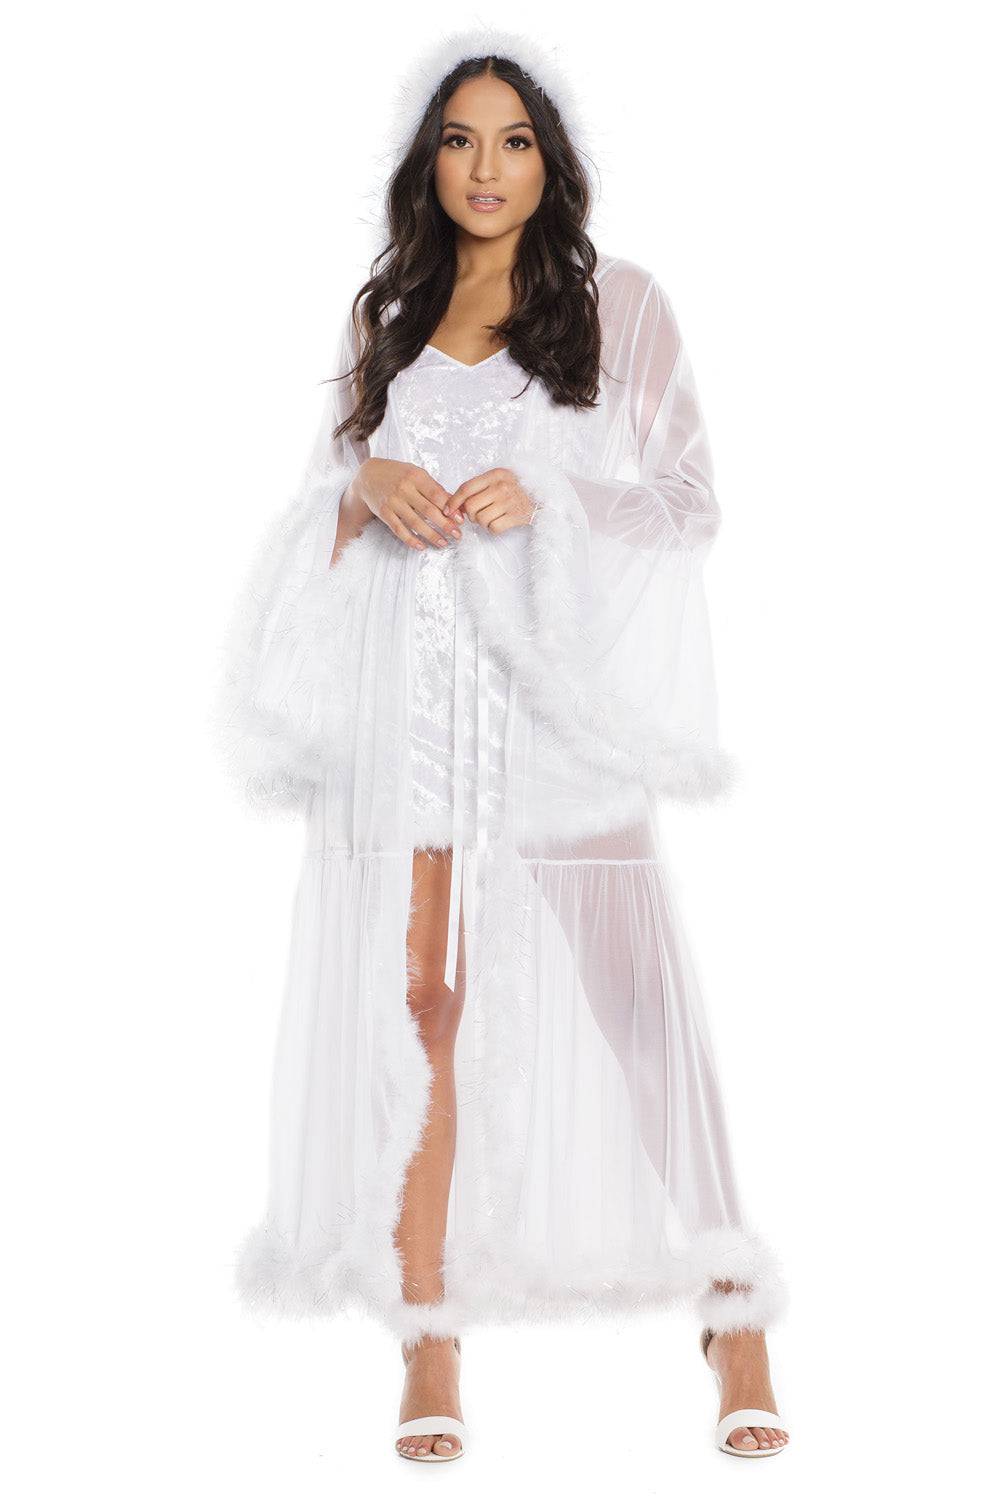 Coquette - 3880 - Full Length Robe - White - OS - Stag Shop